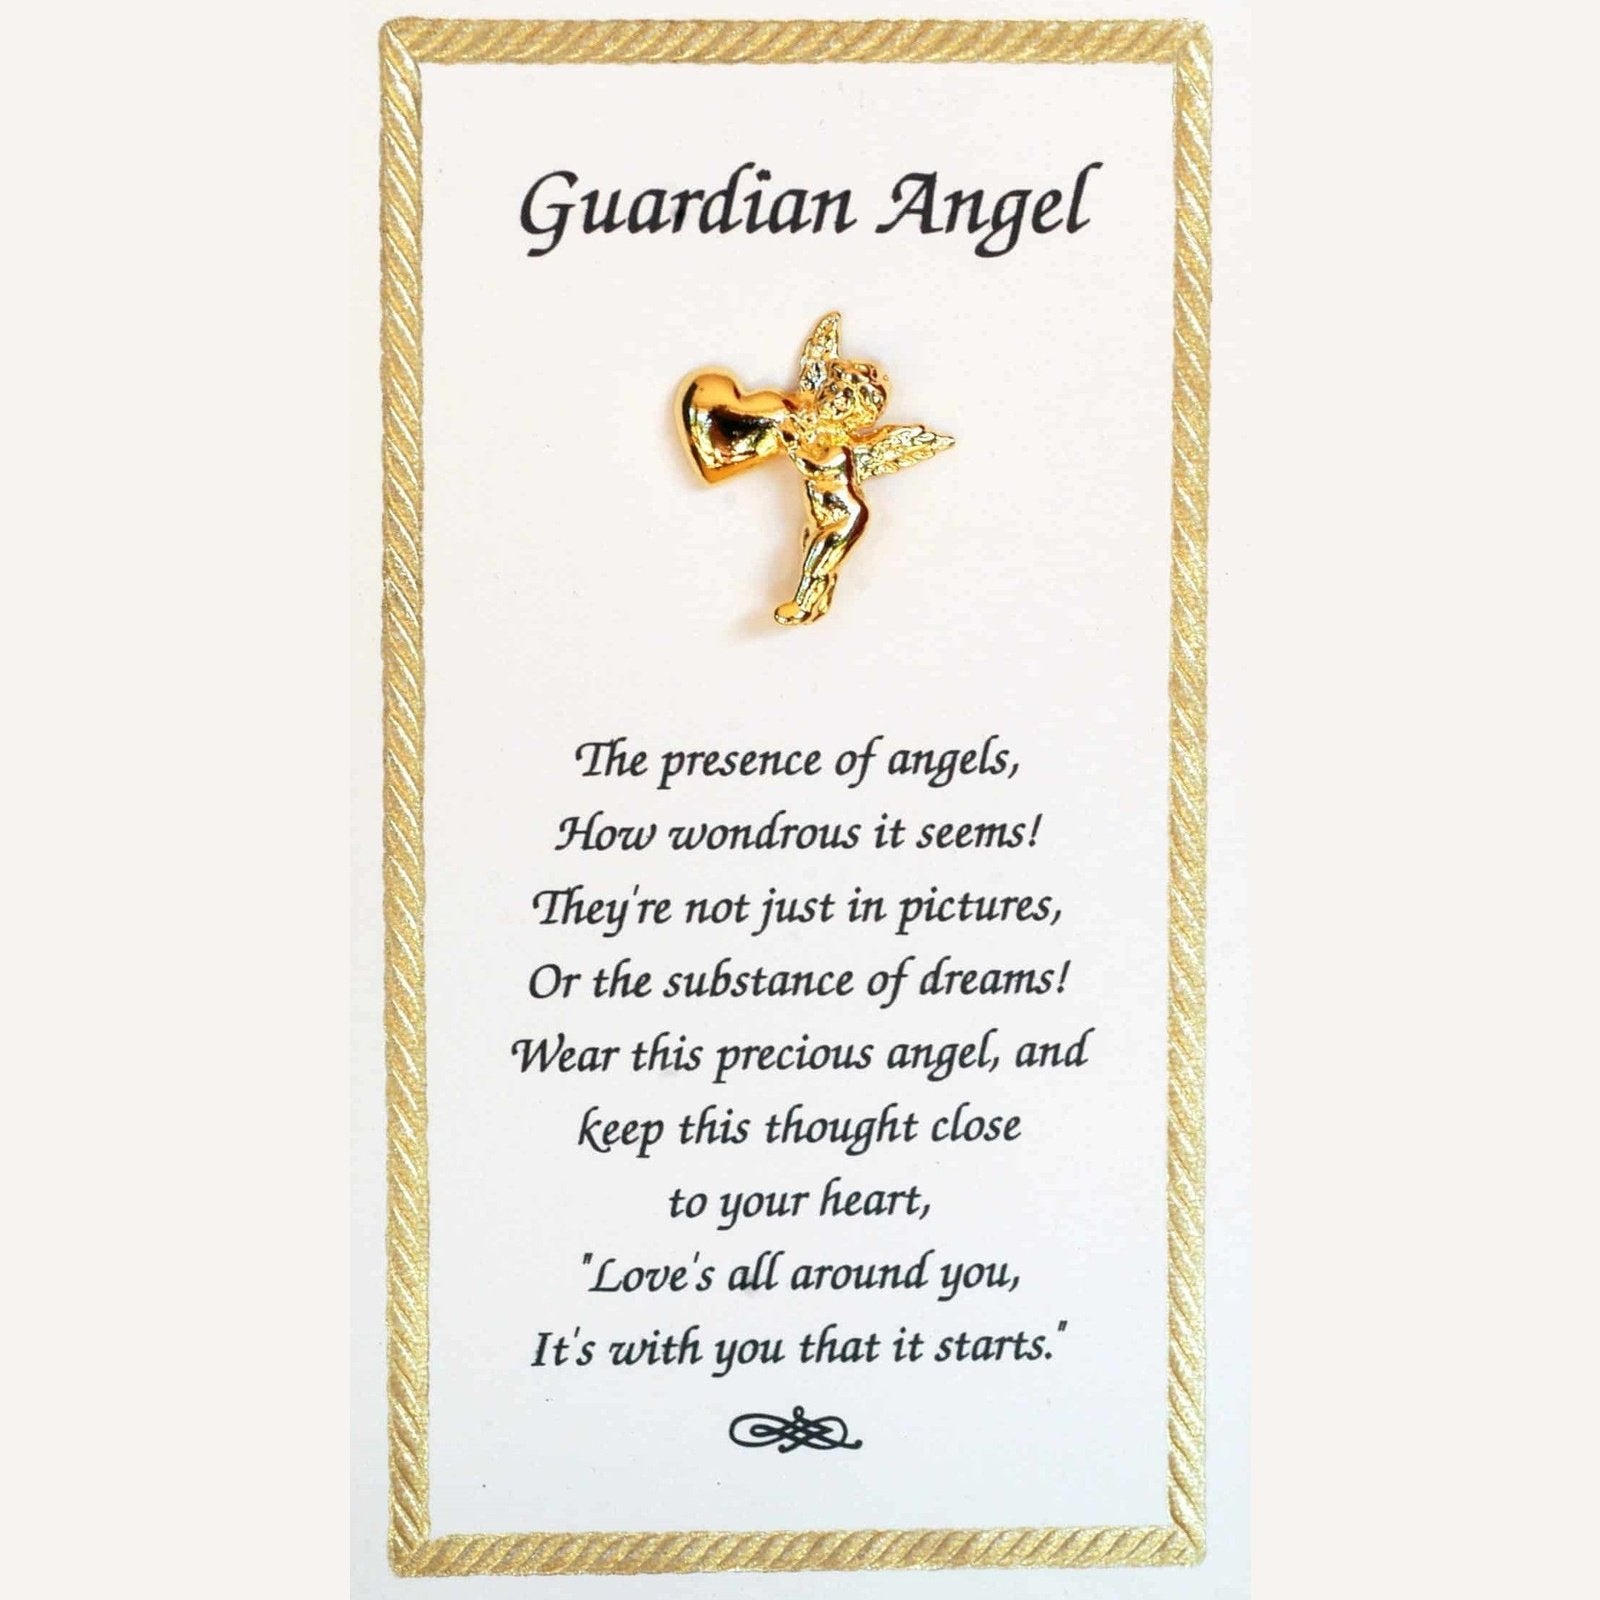 Guardian Angel Lapel Pin with Angel